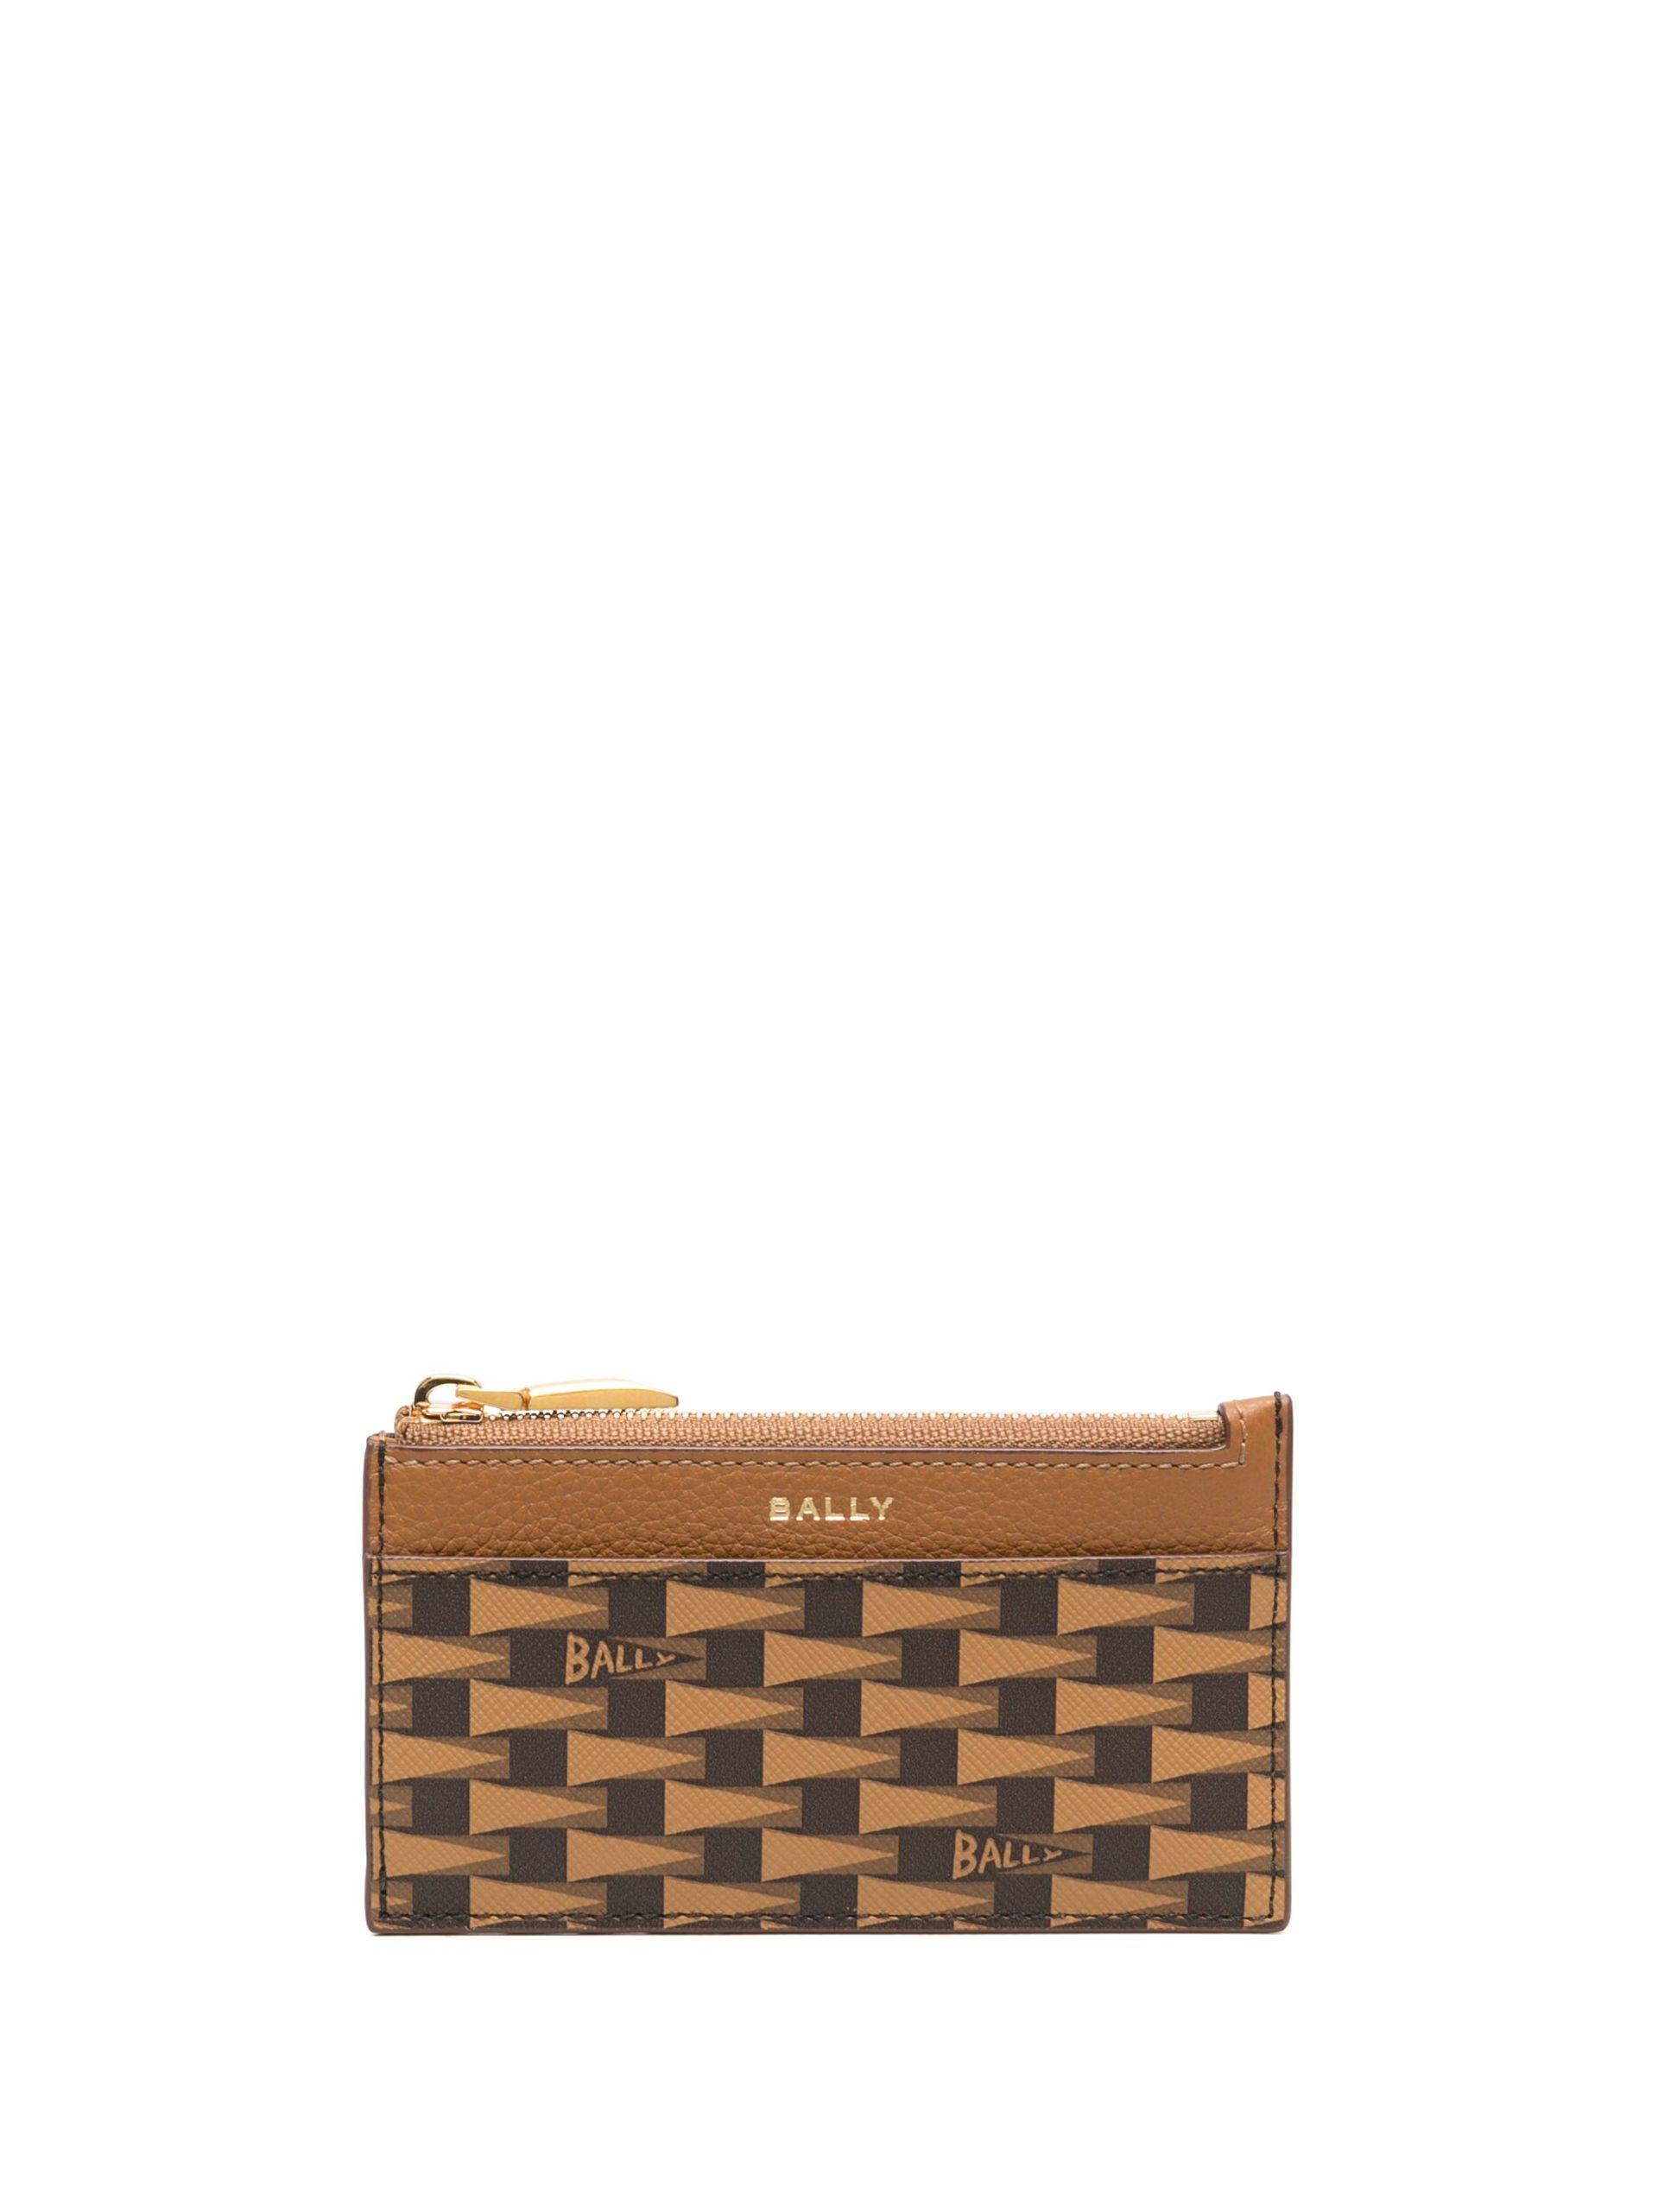 Bally Pennant Leather Cardholder - Neutrals